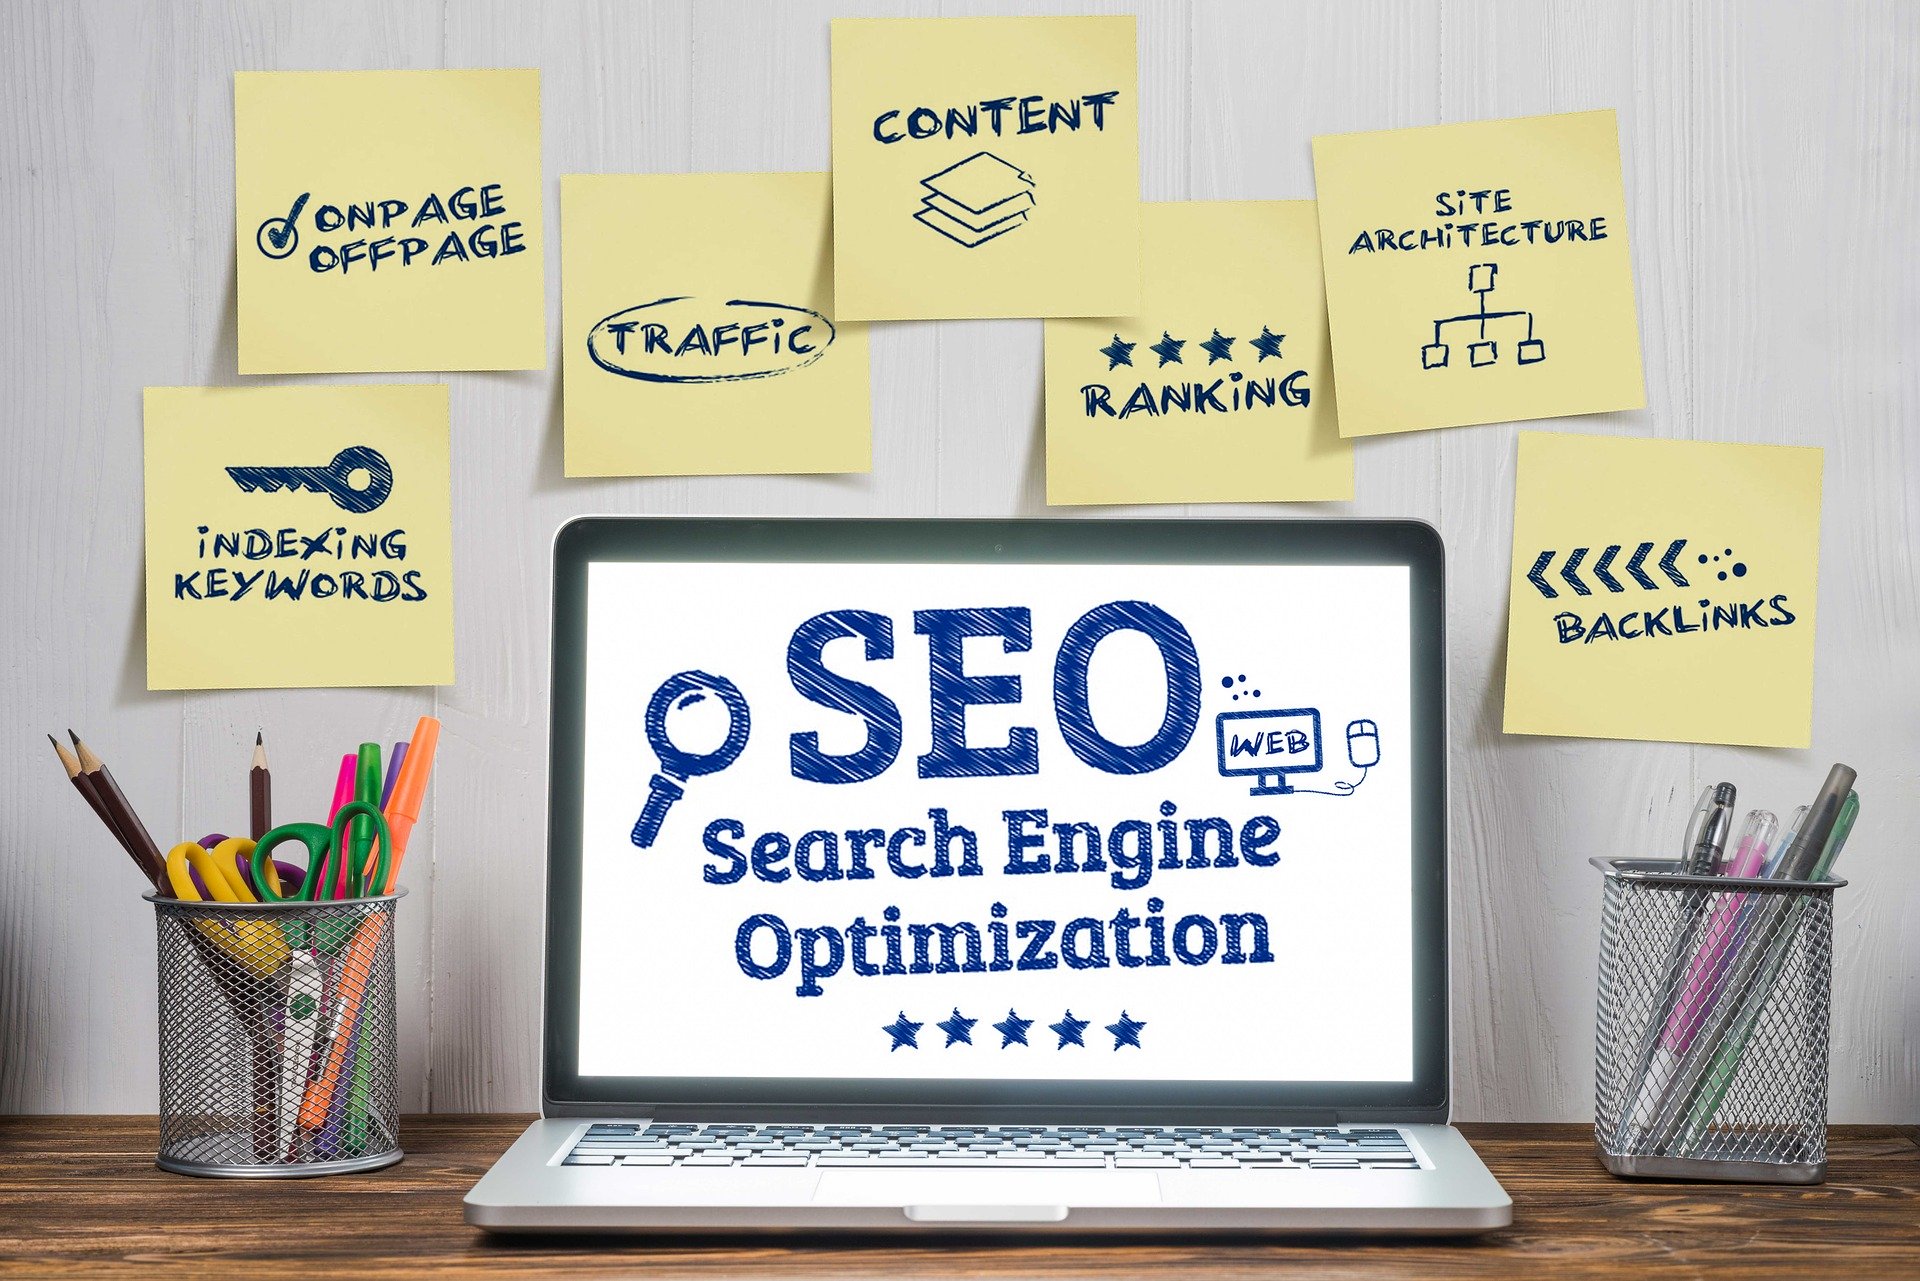 Construction workers and SEO campaigns